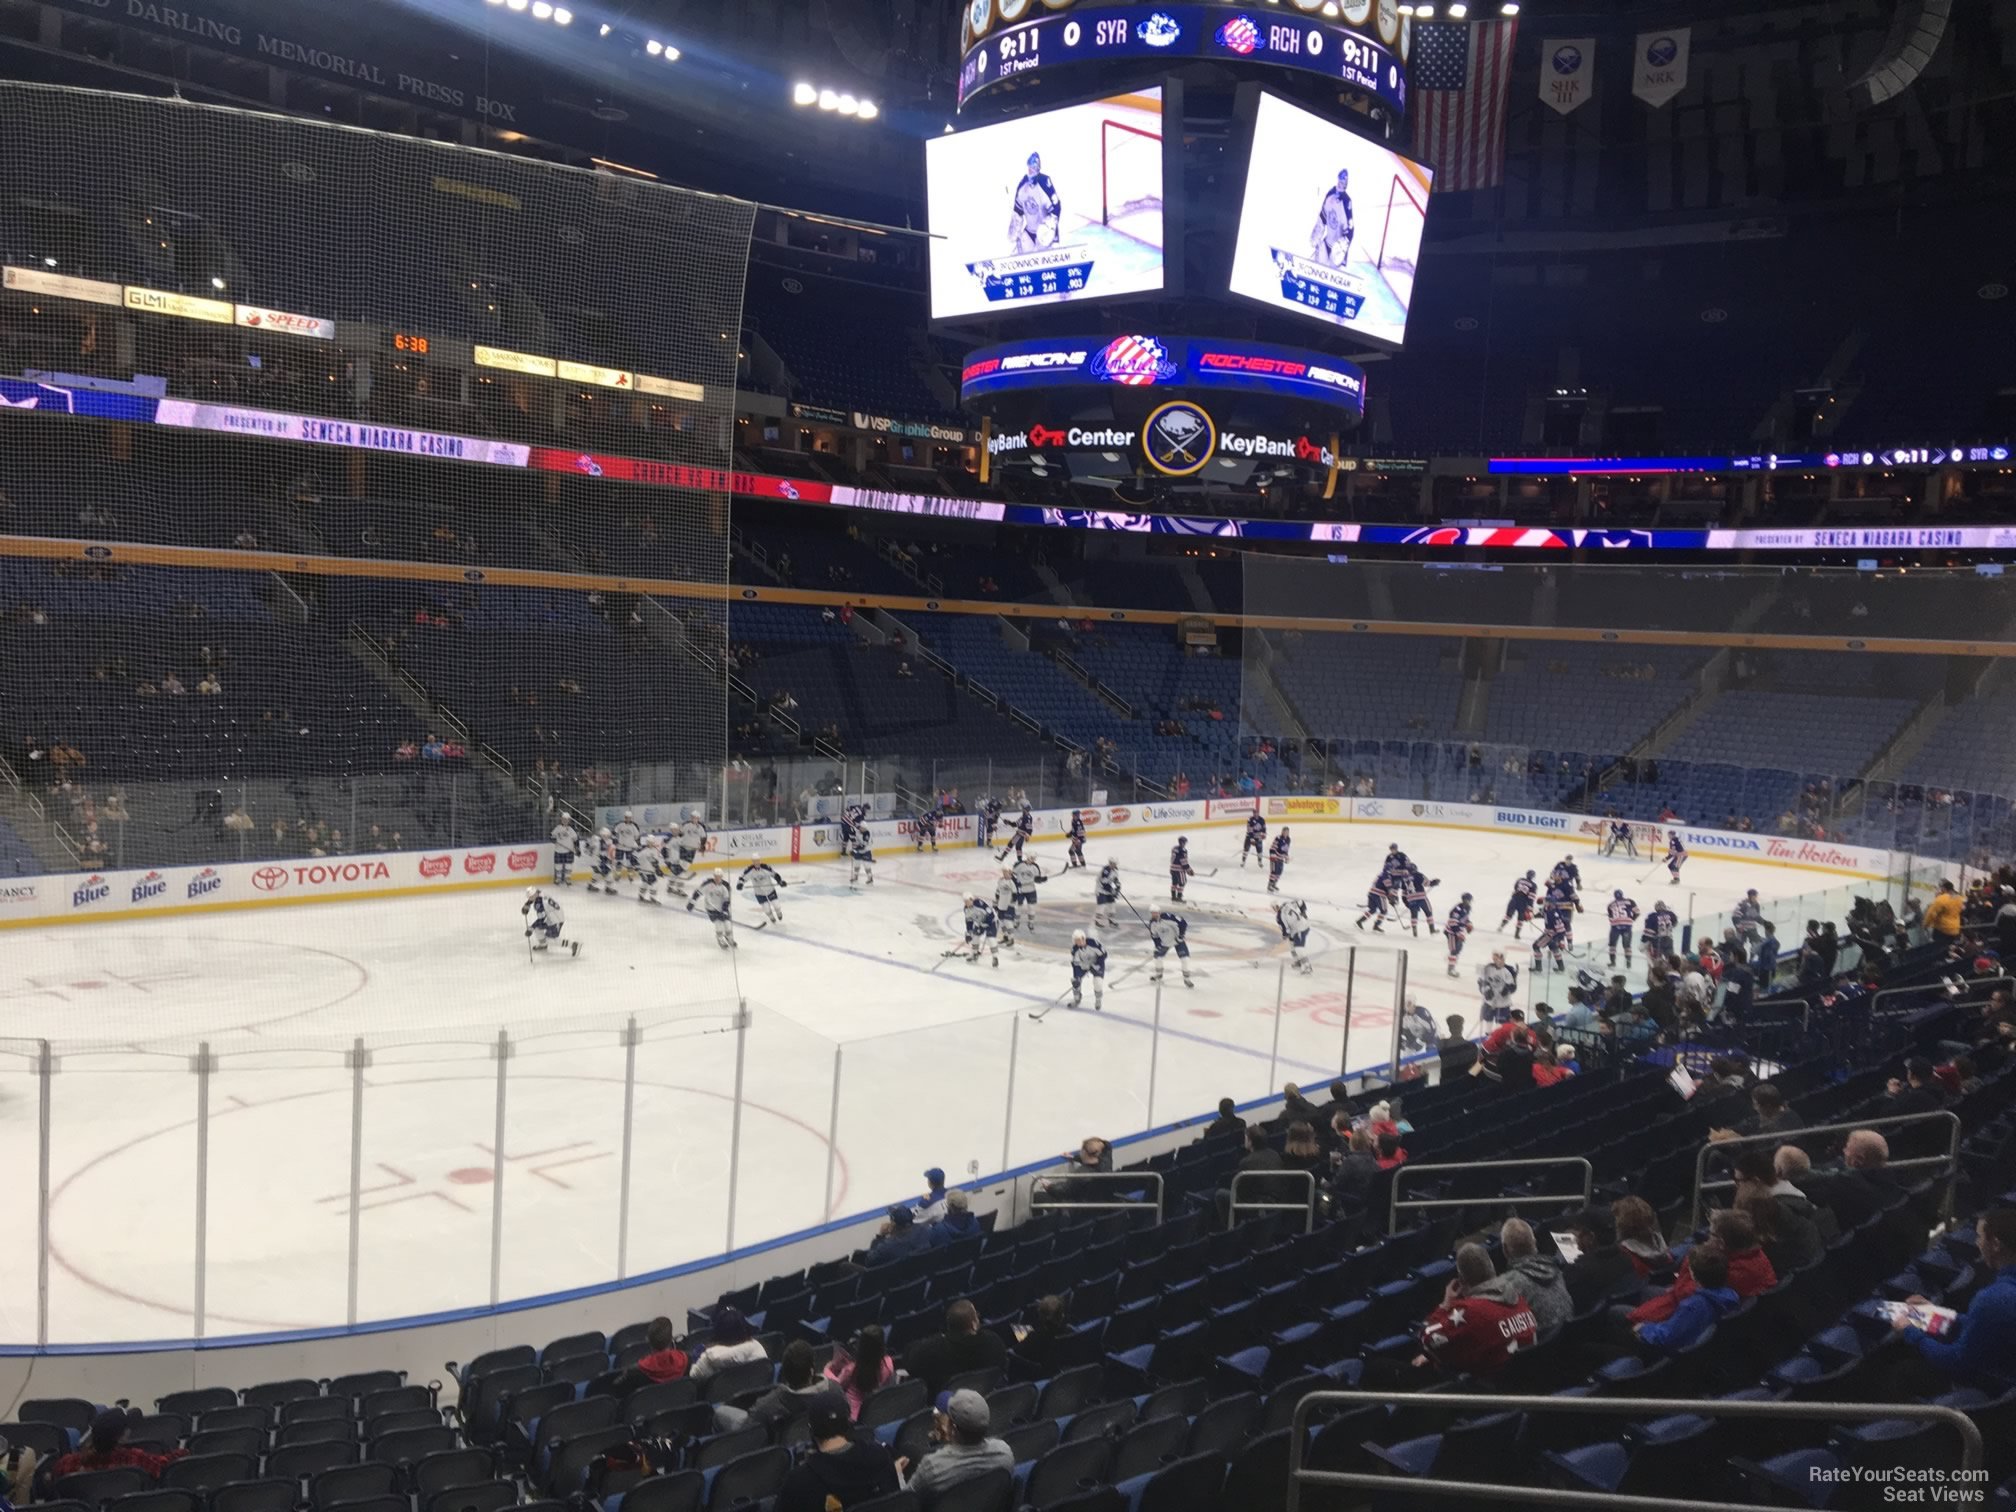 section 108, row 22 seat view  for hockey - keybank center